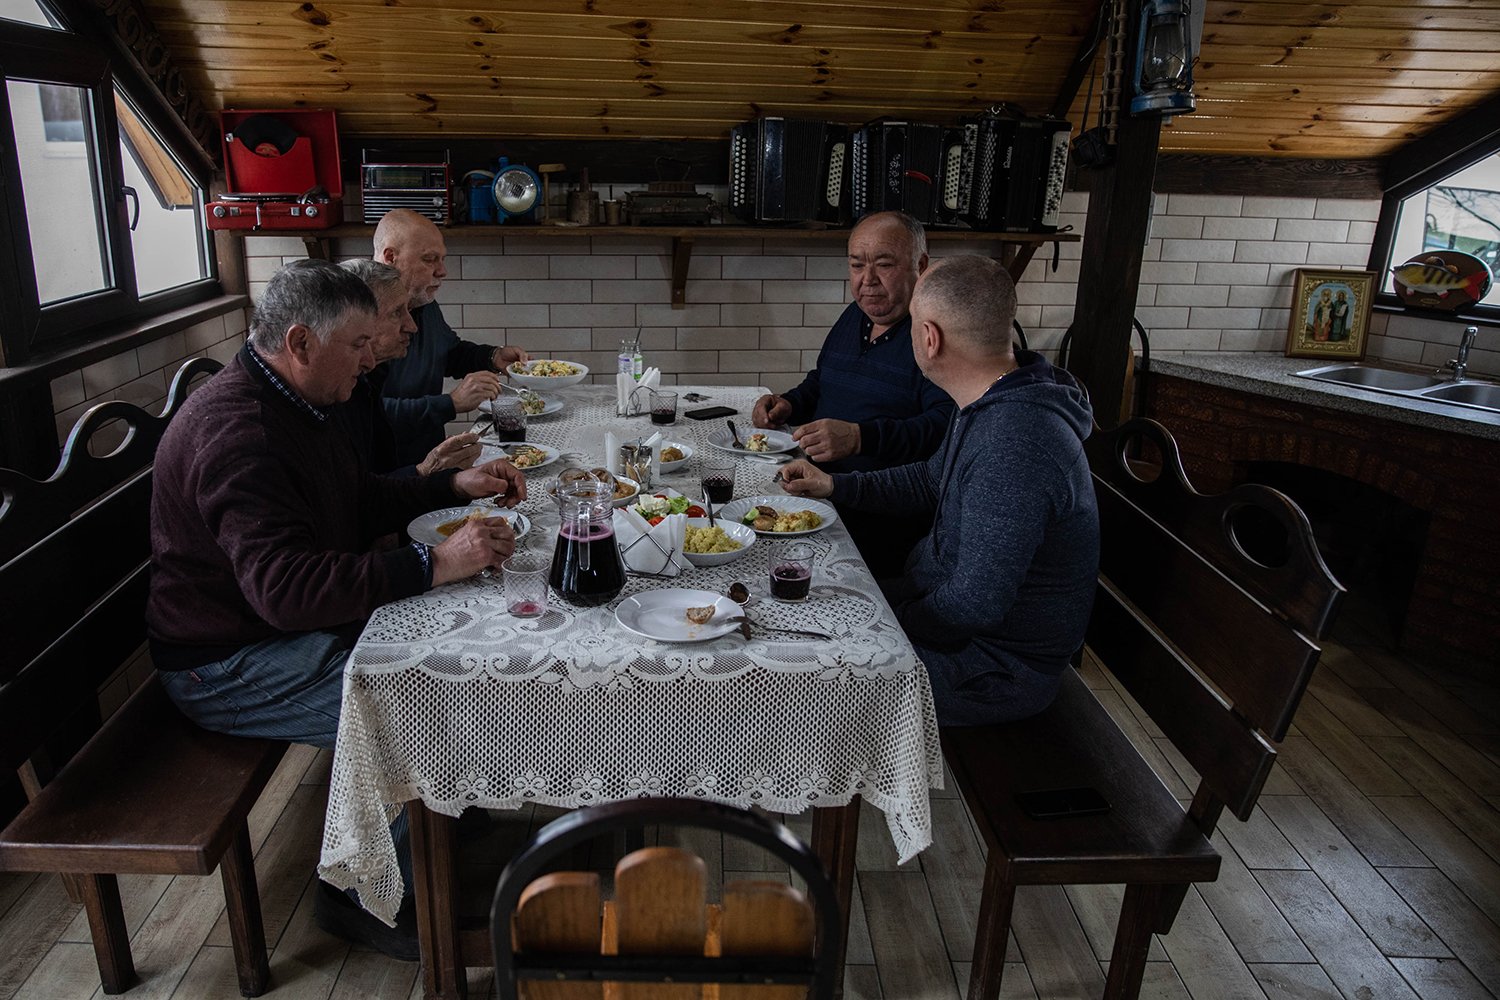 Gheorghe Diaconu, who co-owns the La Costesti tourist resort, shares dinner with displaced men from Ukraine.